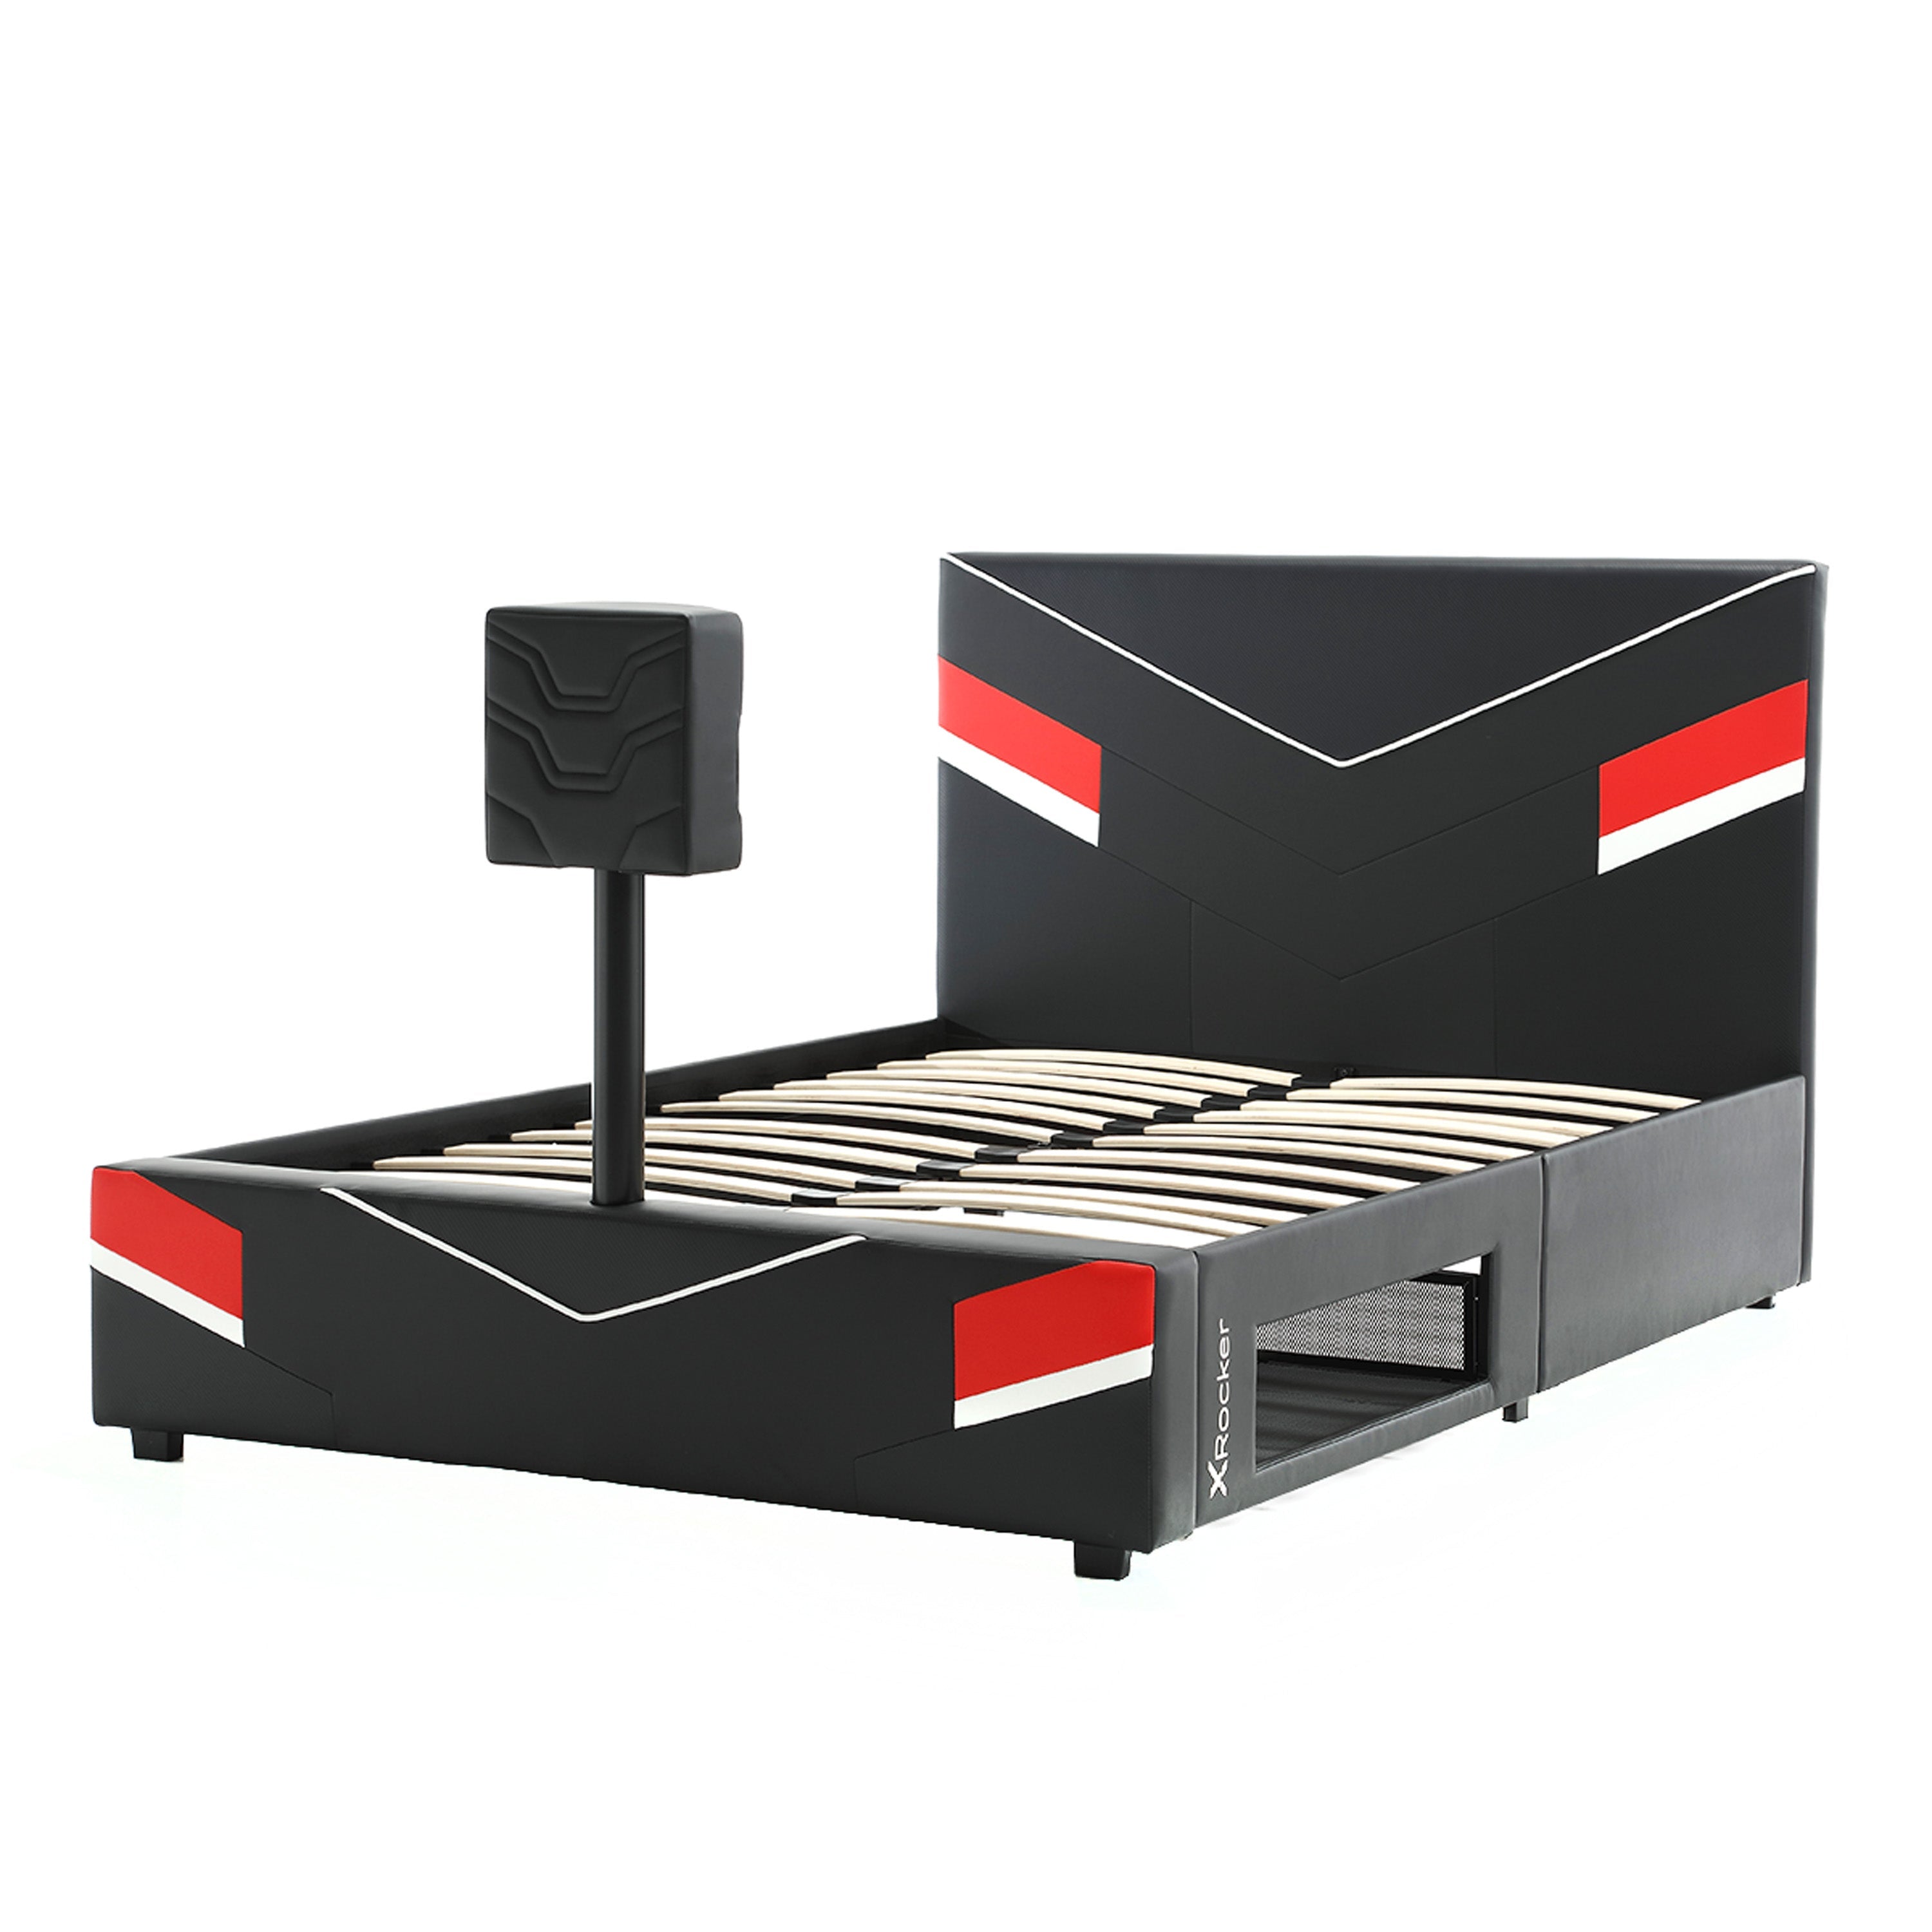 Orion eSports Gaming Bed Frame with TV Mount, Black/Red, Full